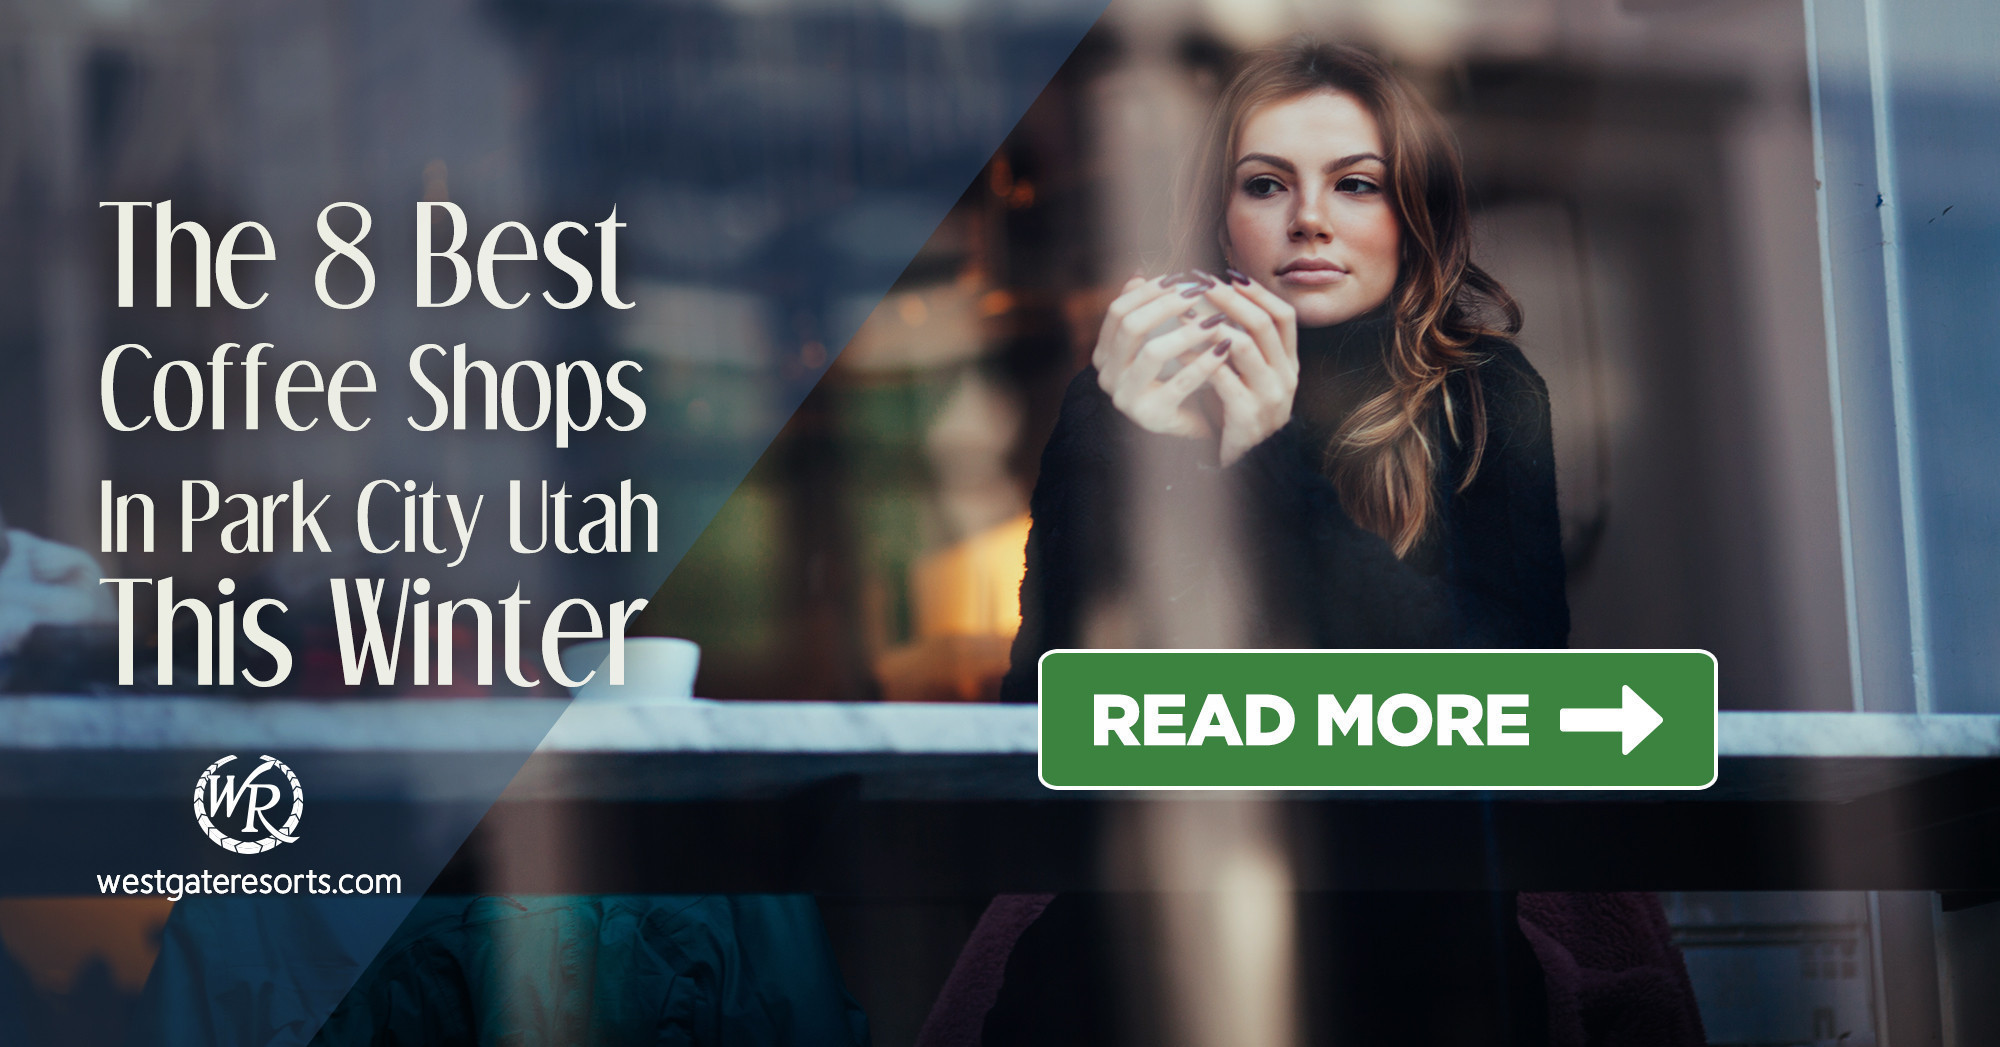 The 8 Best Coffee Shops In Park City Utah This Winter | Park City Coffee Shops